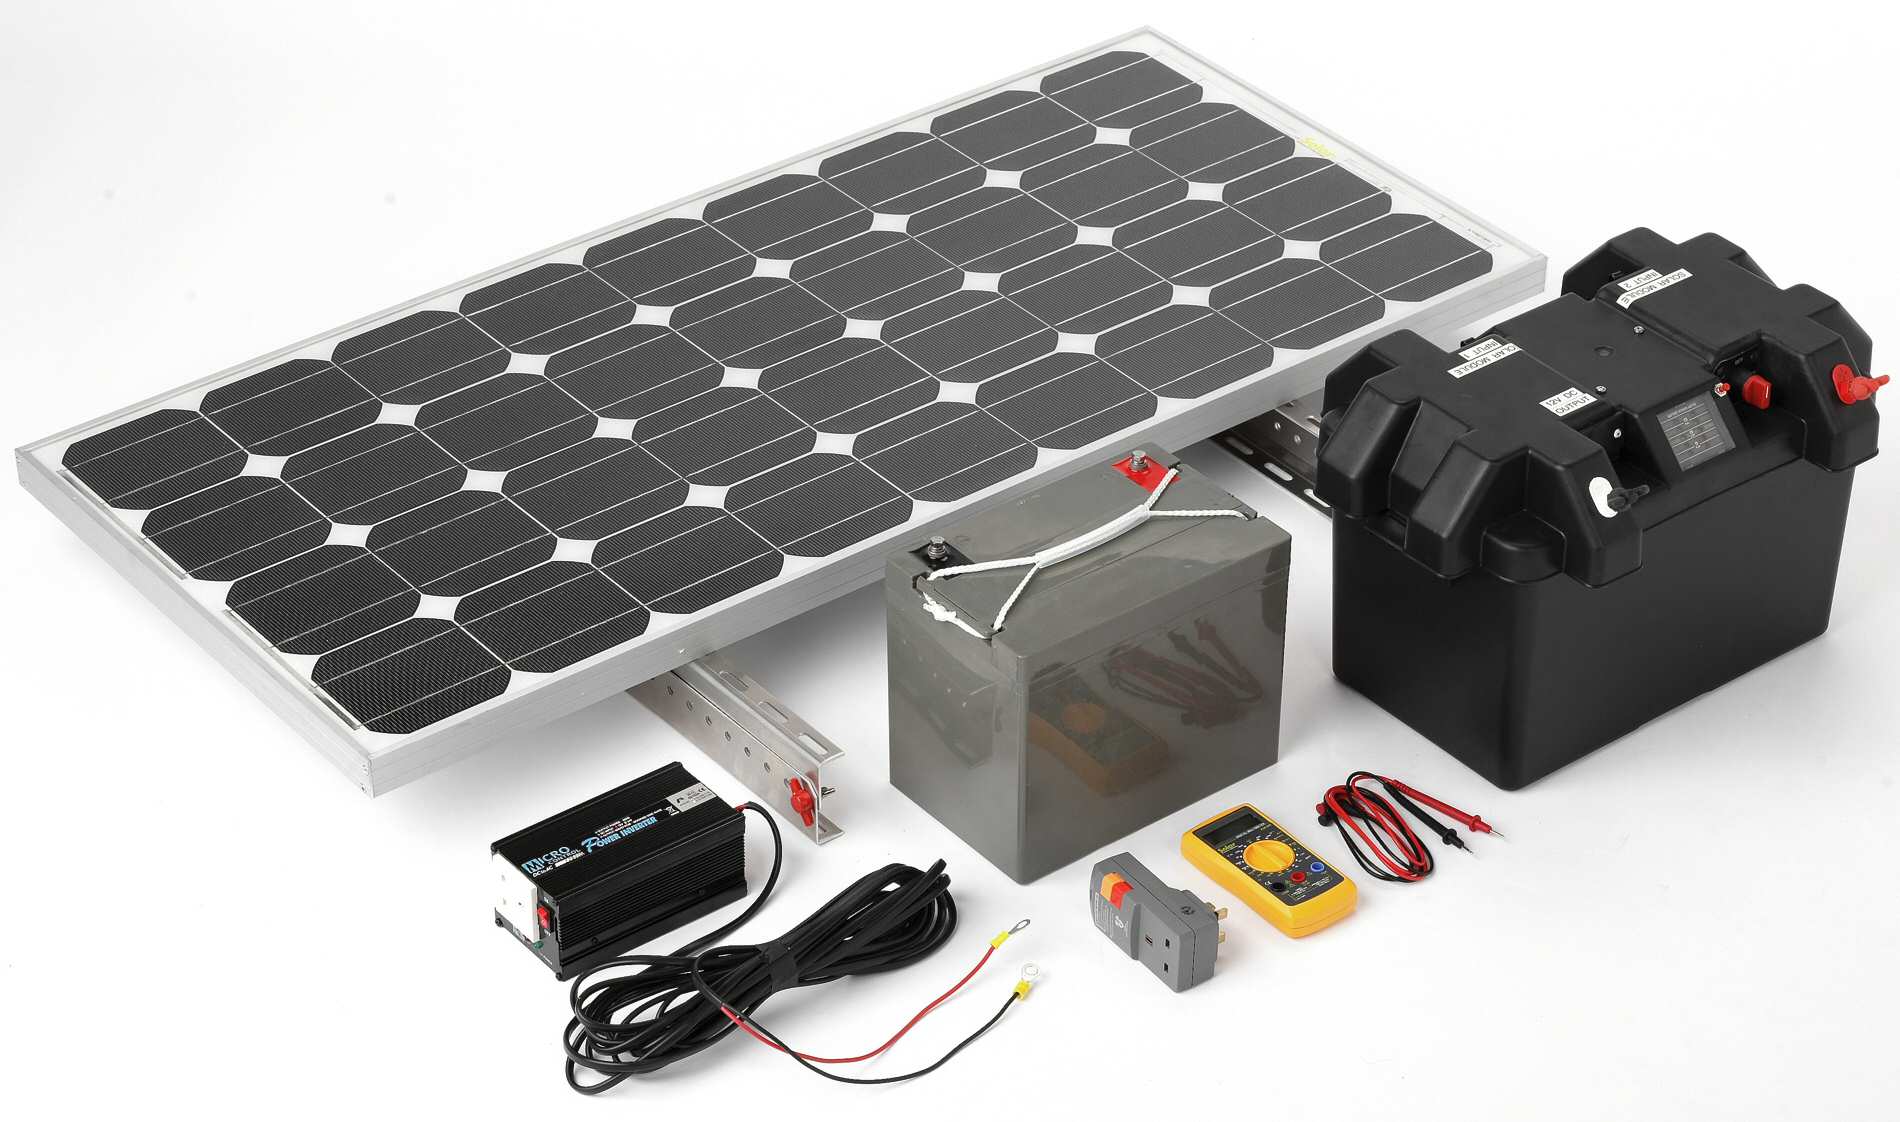 solar panel systems offer a reliable and sustainable alternative the 